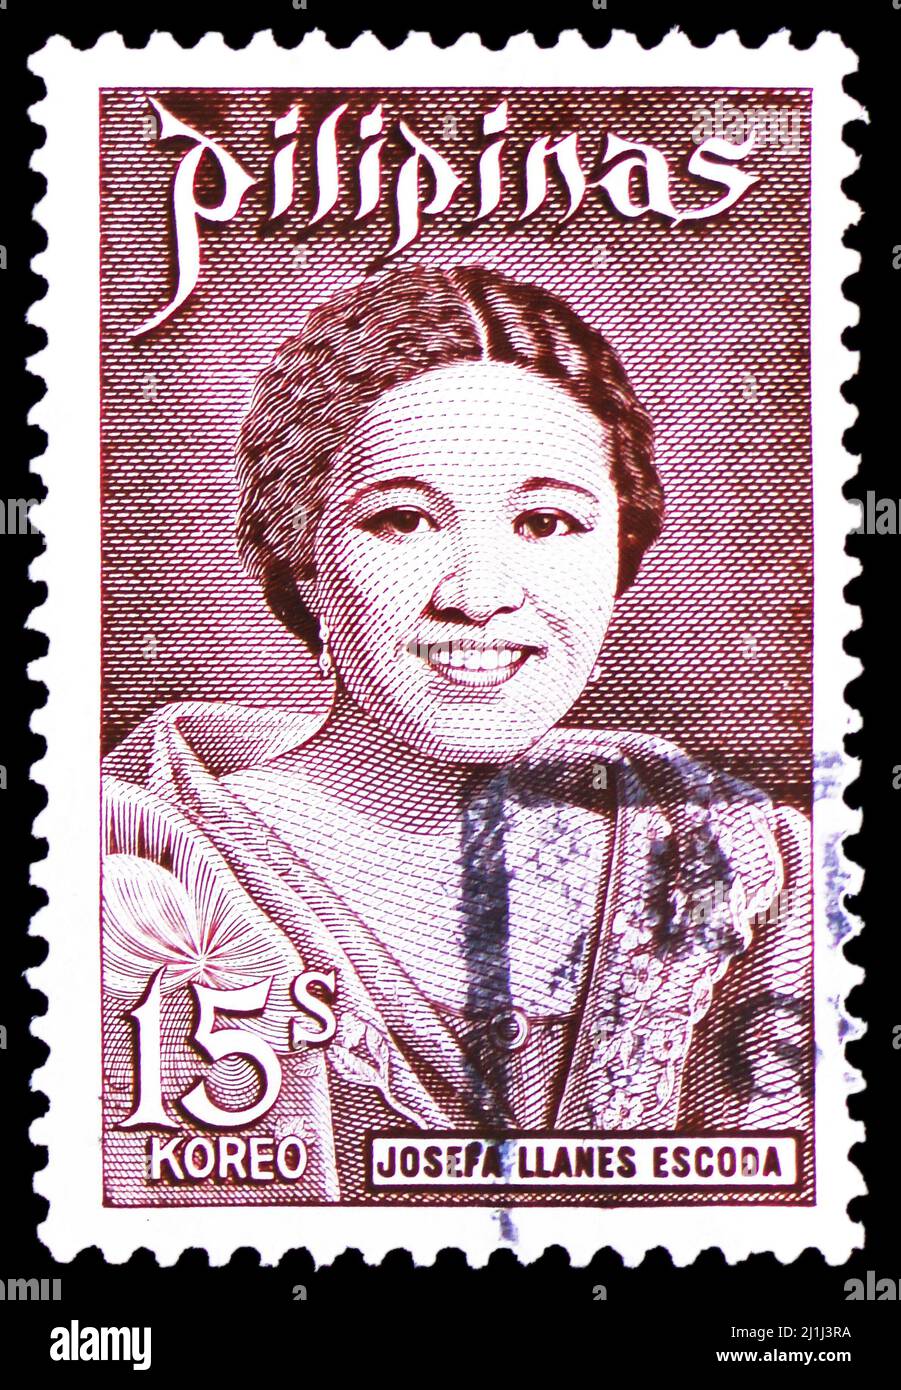 MOSCOW, RUSSIA - MARCH 12, 2022: Postage stamp printed in Philippines shows Josefa Llanes Escoda (1898-45) Founder, Phill. Girl Scouting, Personalitie Stock Photo